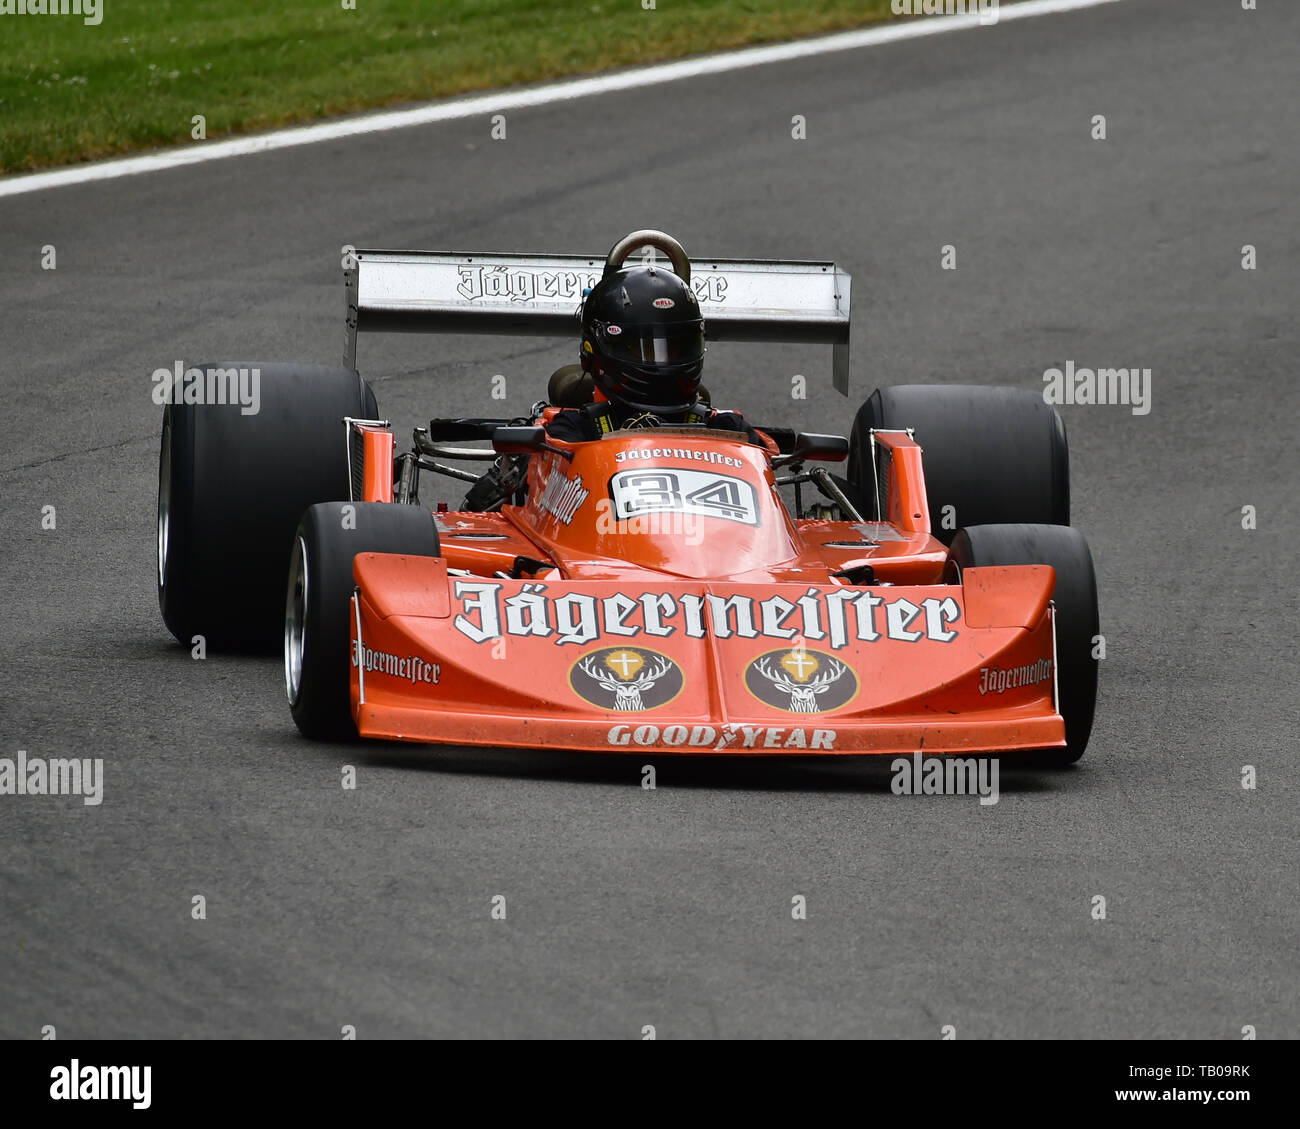 Henry Fletcher, March 761, FIA Masters Historic Formula One Championship, Masters Historic Festival, Brands Hatch, May 2019. Brands Hatch, classic car Stock Photo